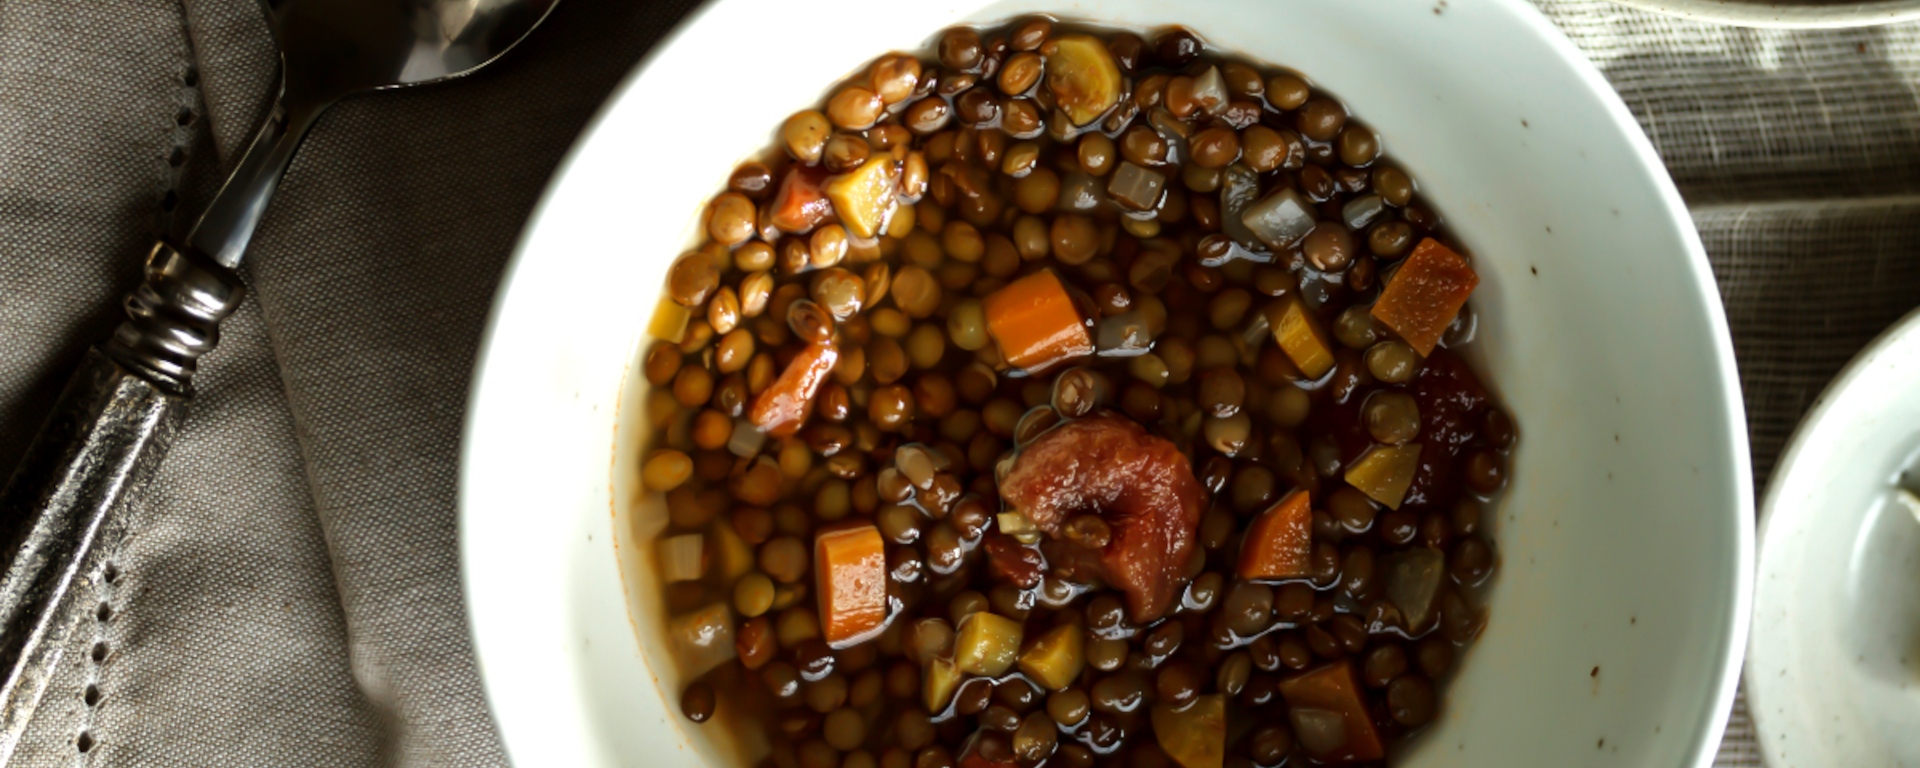 LuvMyRecipe.com - Lentil Soup With Egyptian Spices Featured